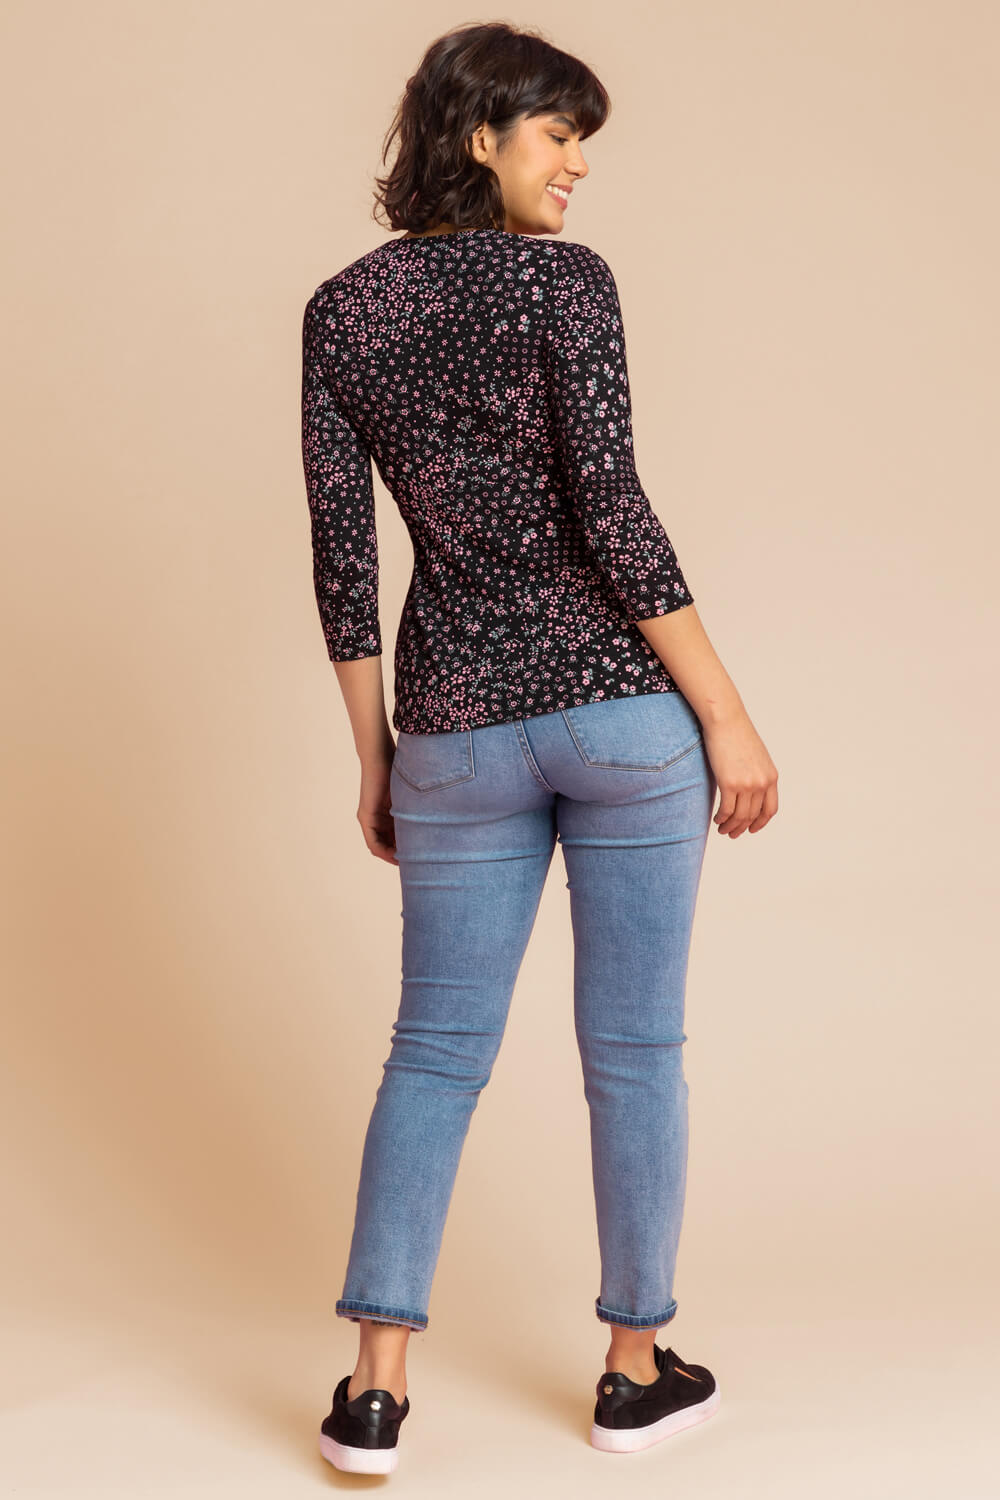 Black Ditsy Floral Print Ruched Top, Image 2 of 5